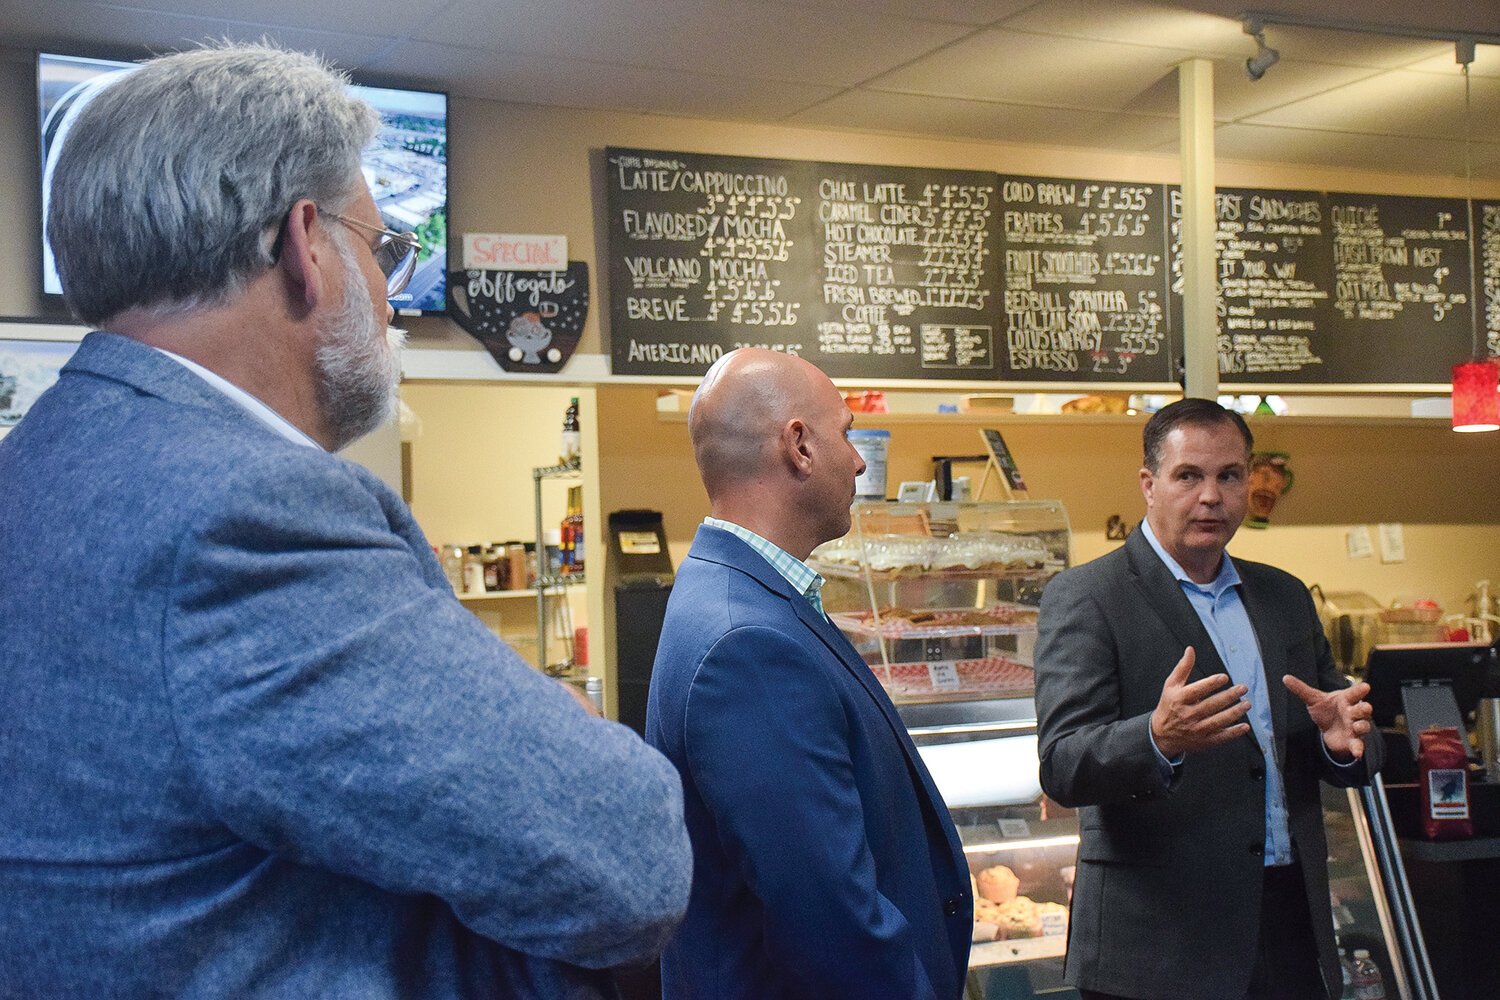 From left, Washington State Reps. Ed Orcutt and Peter Abbarno and state Sen. John Braun talk policy and politics during a meet-and-greet event Monday, Oct. 9 at Luckman Coffee in Woodland.